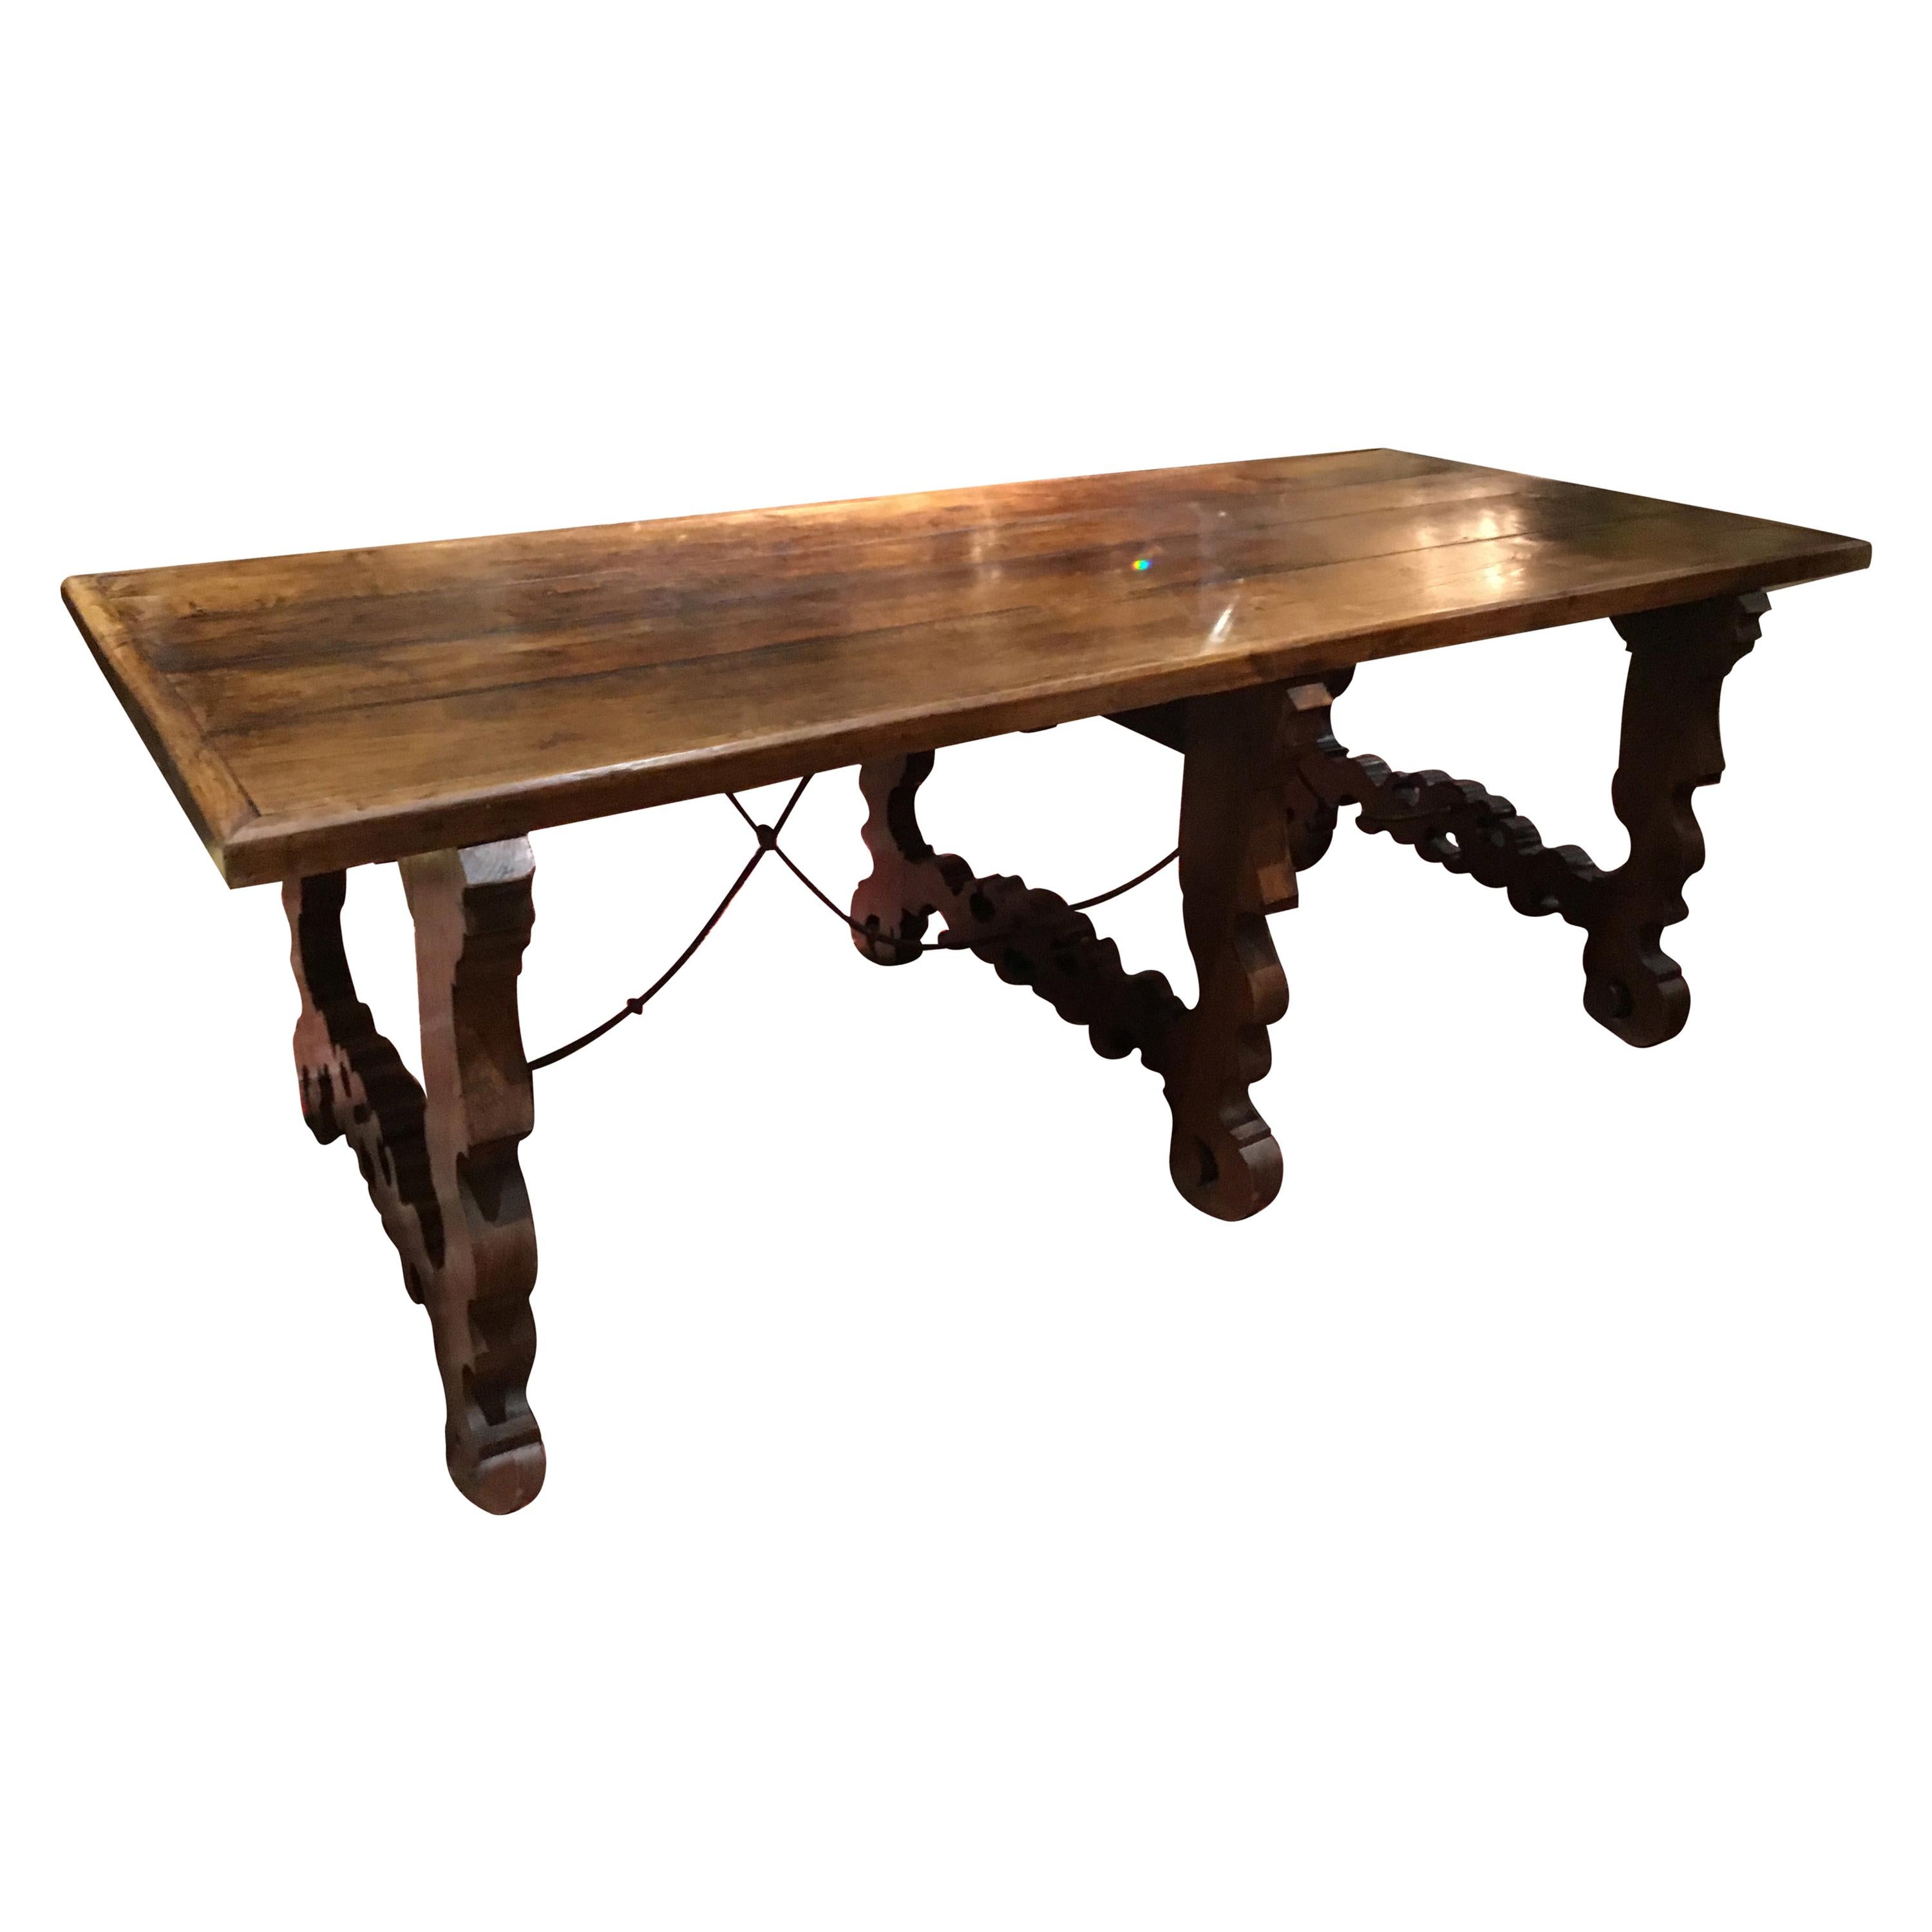 French Farm House Table, 19th Century with Ox Bow Ends and Iron Stretchers